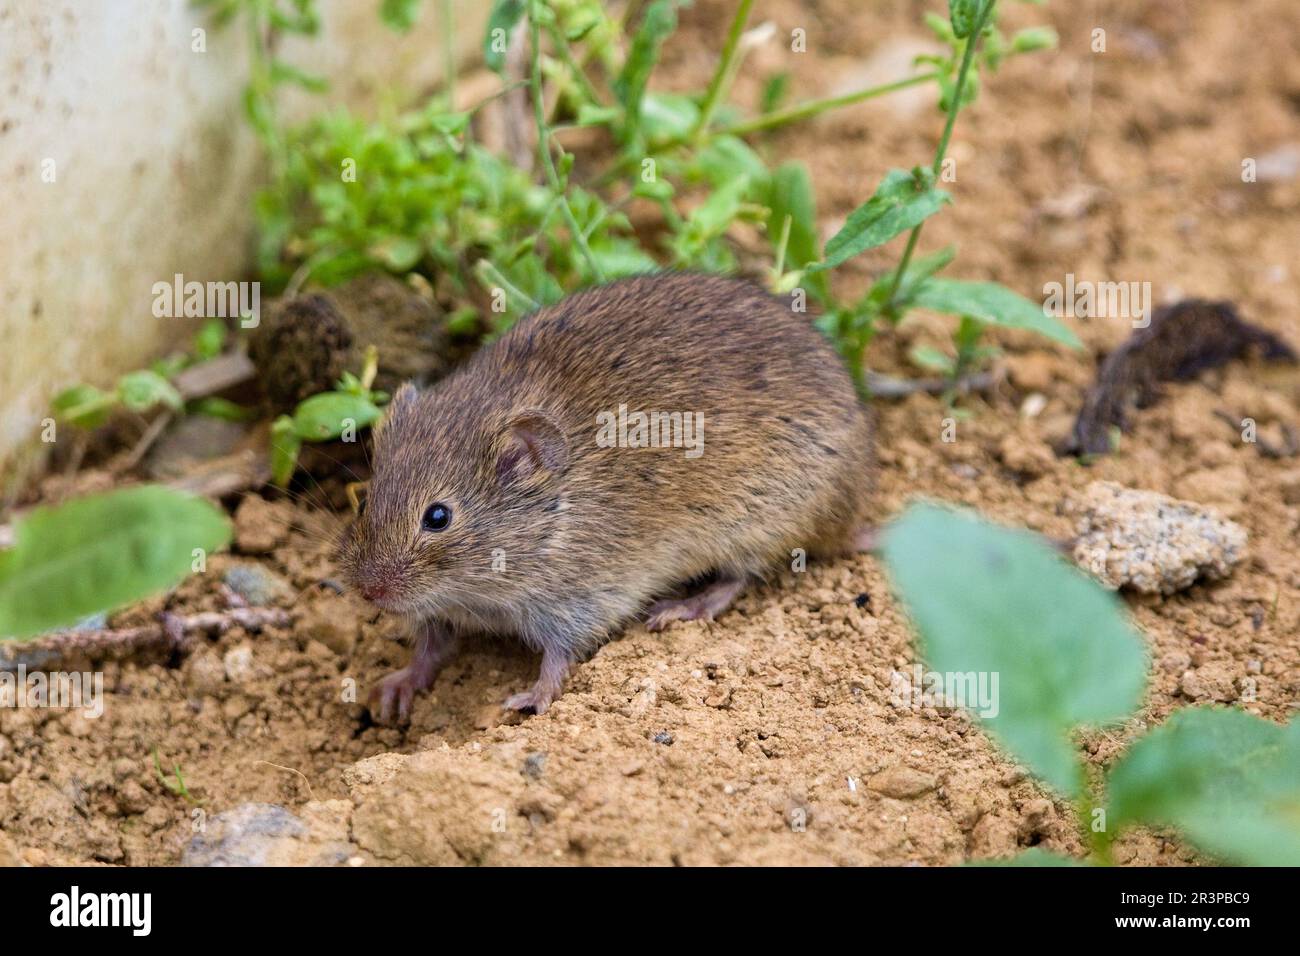 The common vole (Microtus arvalis) in a natural habitat Stock Photo